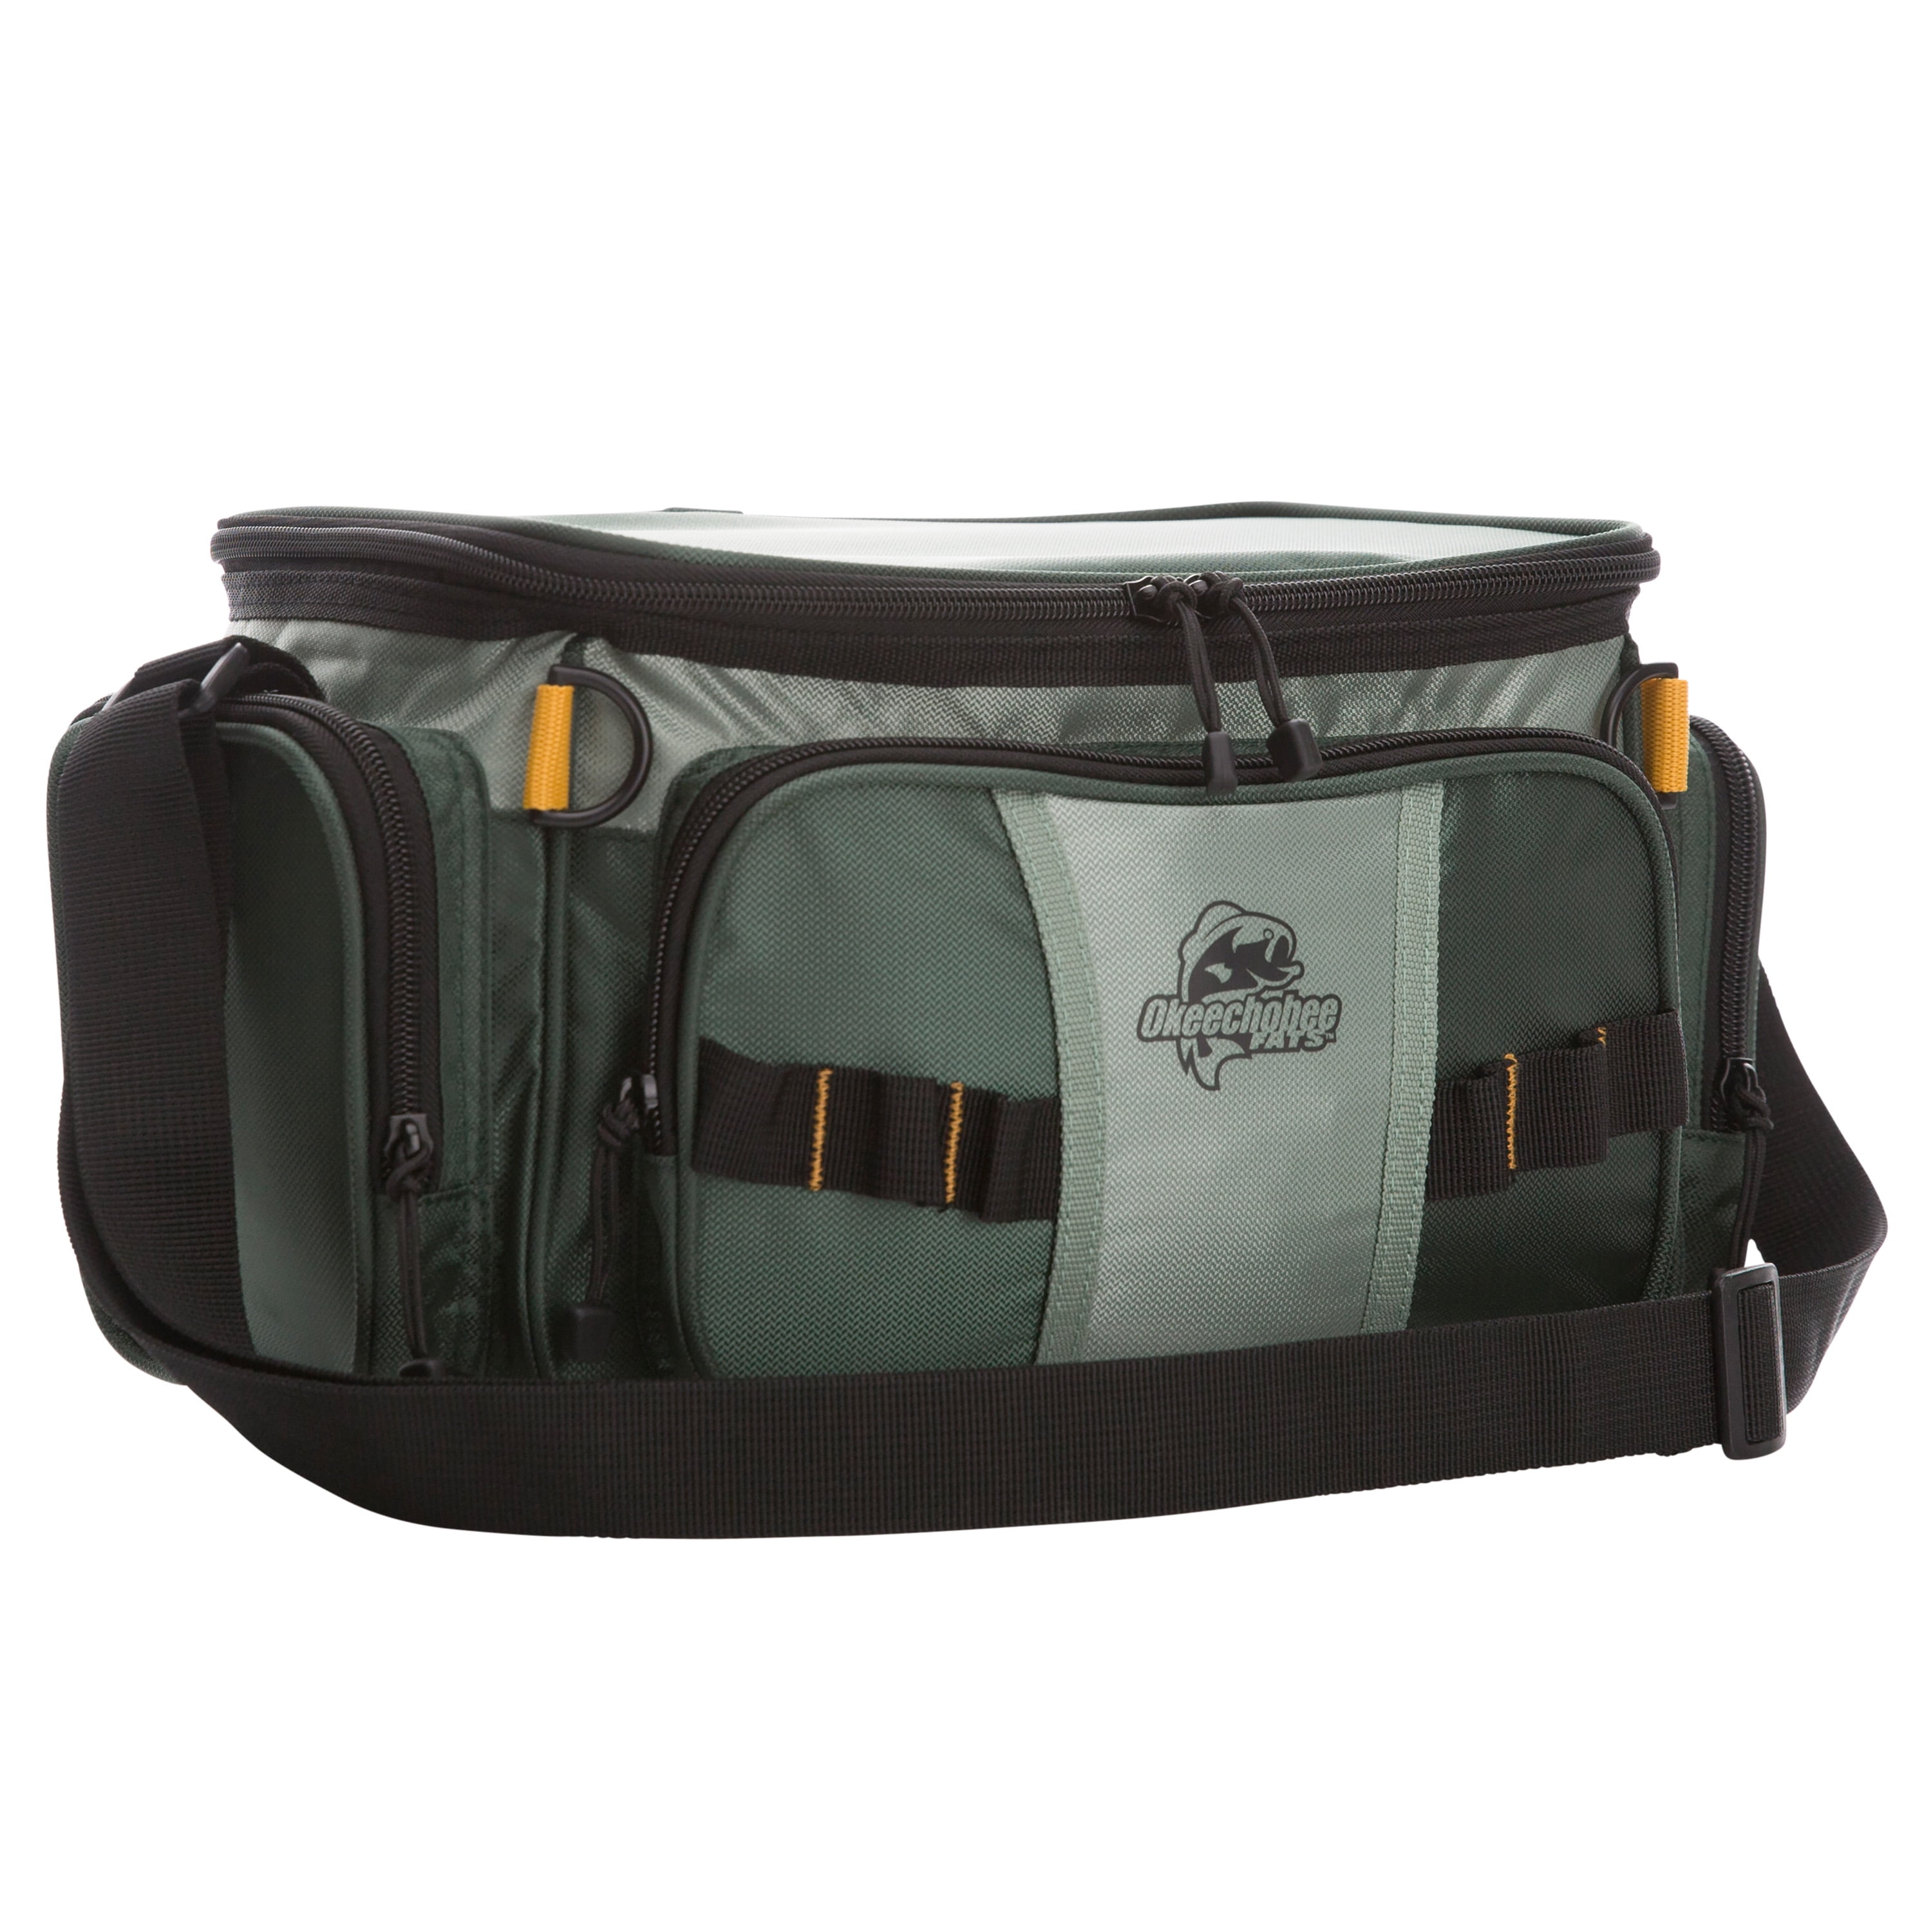 360 Fishing Gear Tackle Bag by Okeechobee Fats | Soft Sided Fishing Bag |  Includes 3 Fishing Accessories Utility Boxes | Top Loading Fishing Tackle